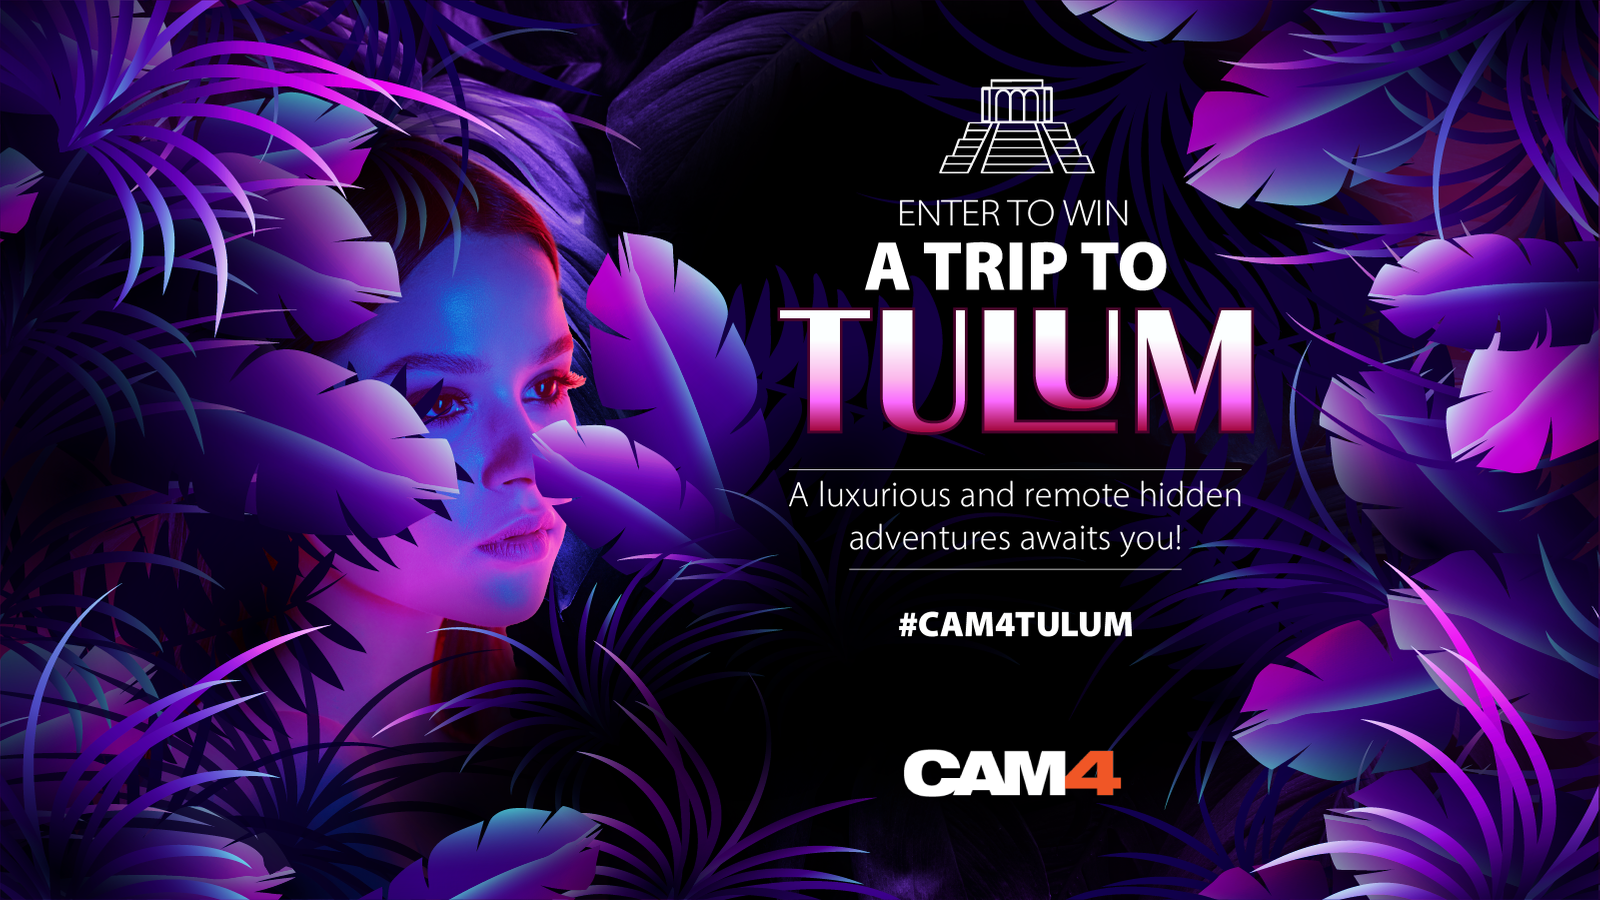 CAM4 Announces a Chance to Win a Trip to Tulum, Mexico